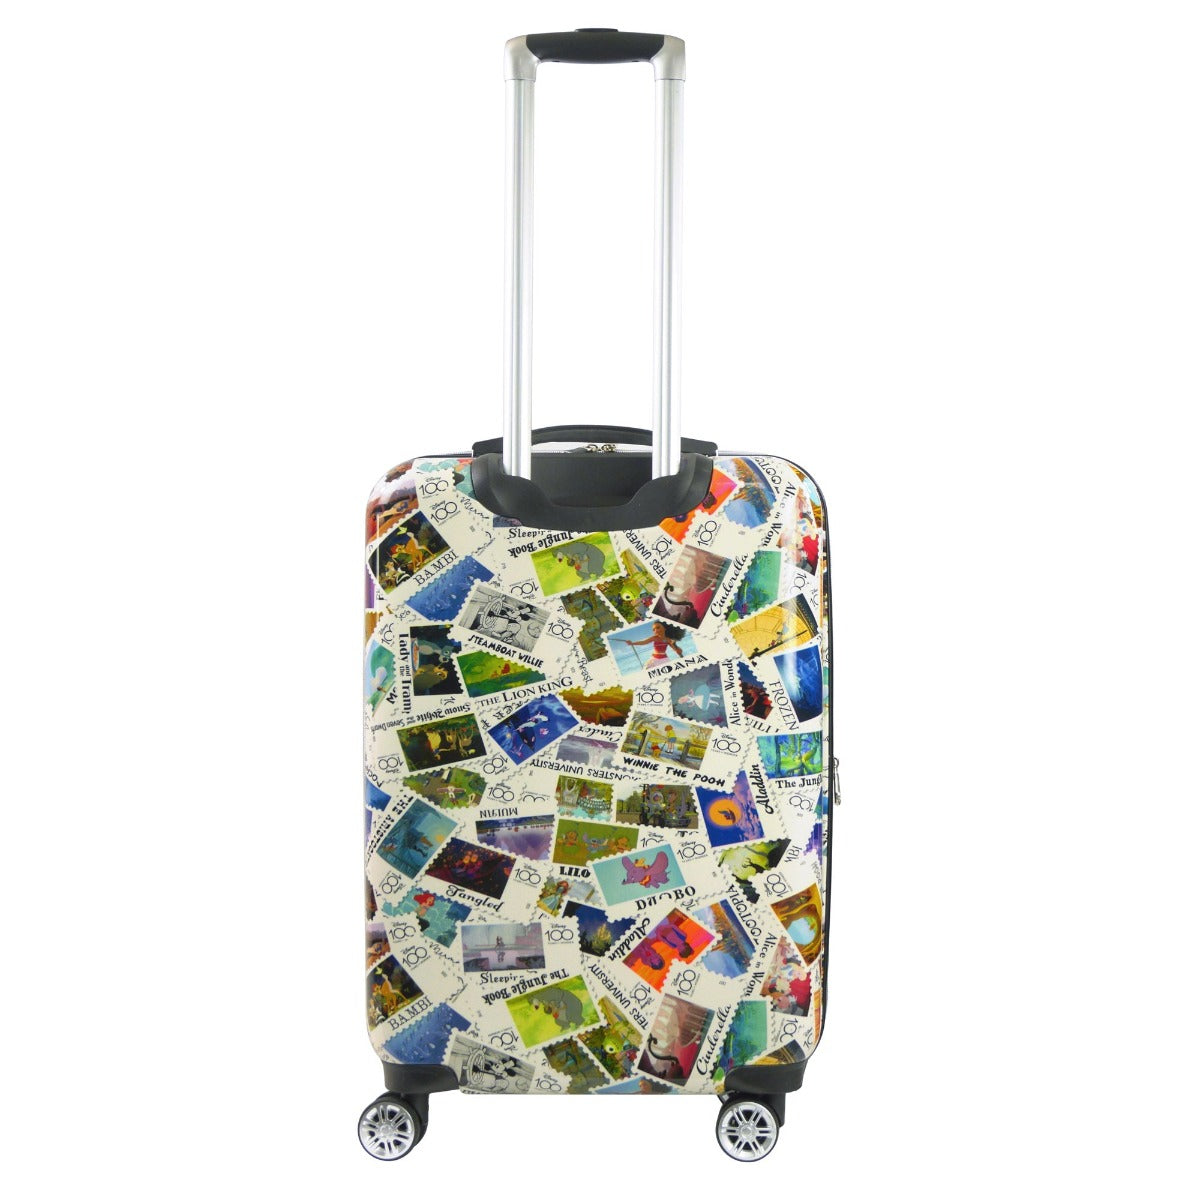 Ful Disney 100 Year Anniversary Stamps ABS Hardsided Spinner Suitcase 26 inch Checked Luggage limited edition 360 degree wheels 